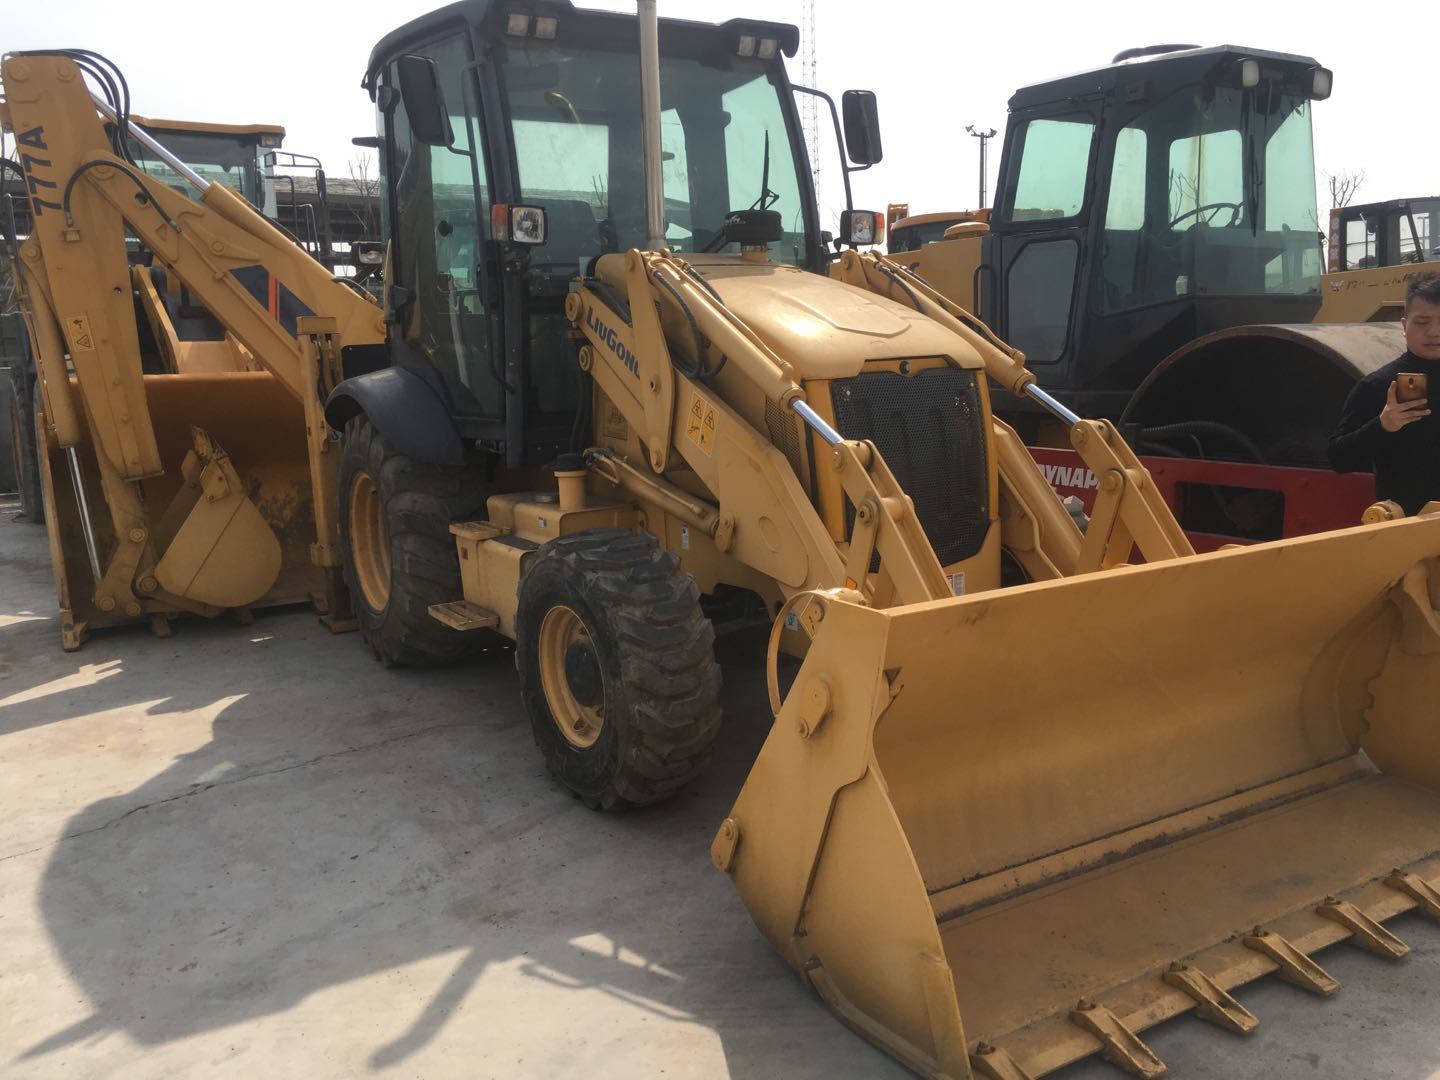 Used Chinese Liu Gong Backhoe Loader in New Condition